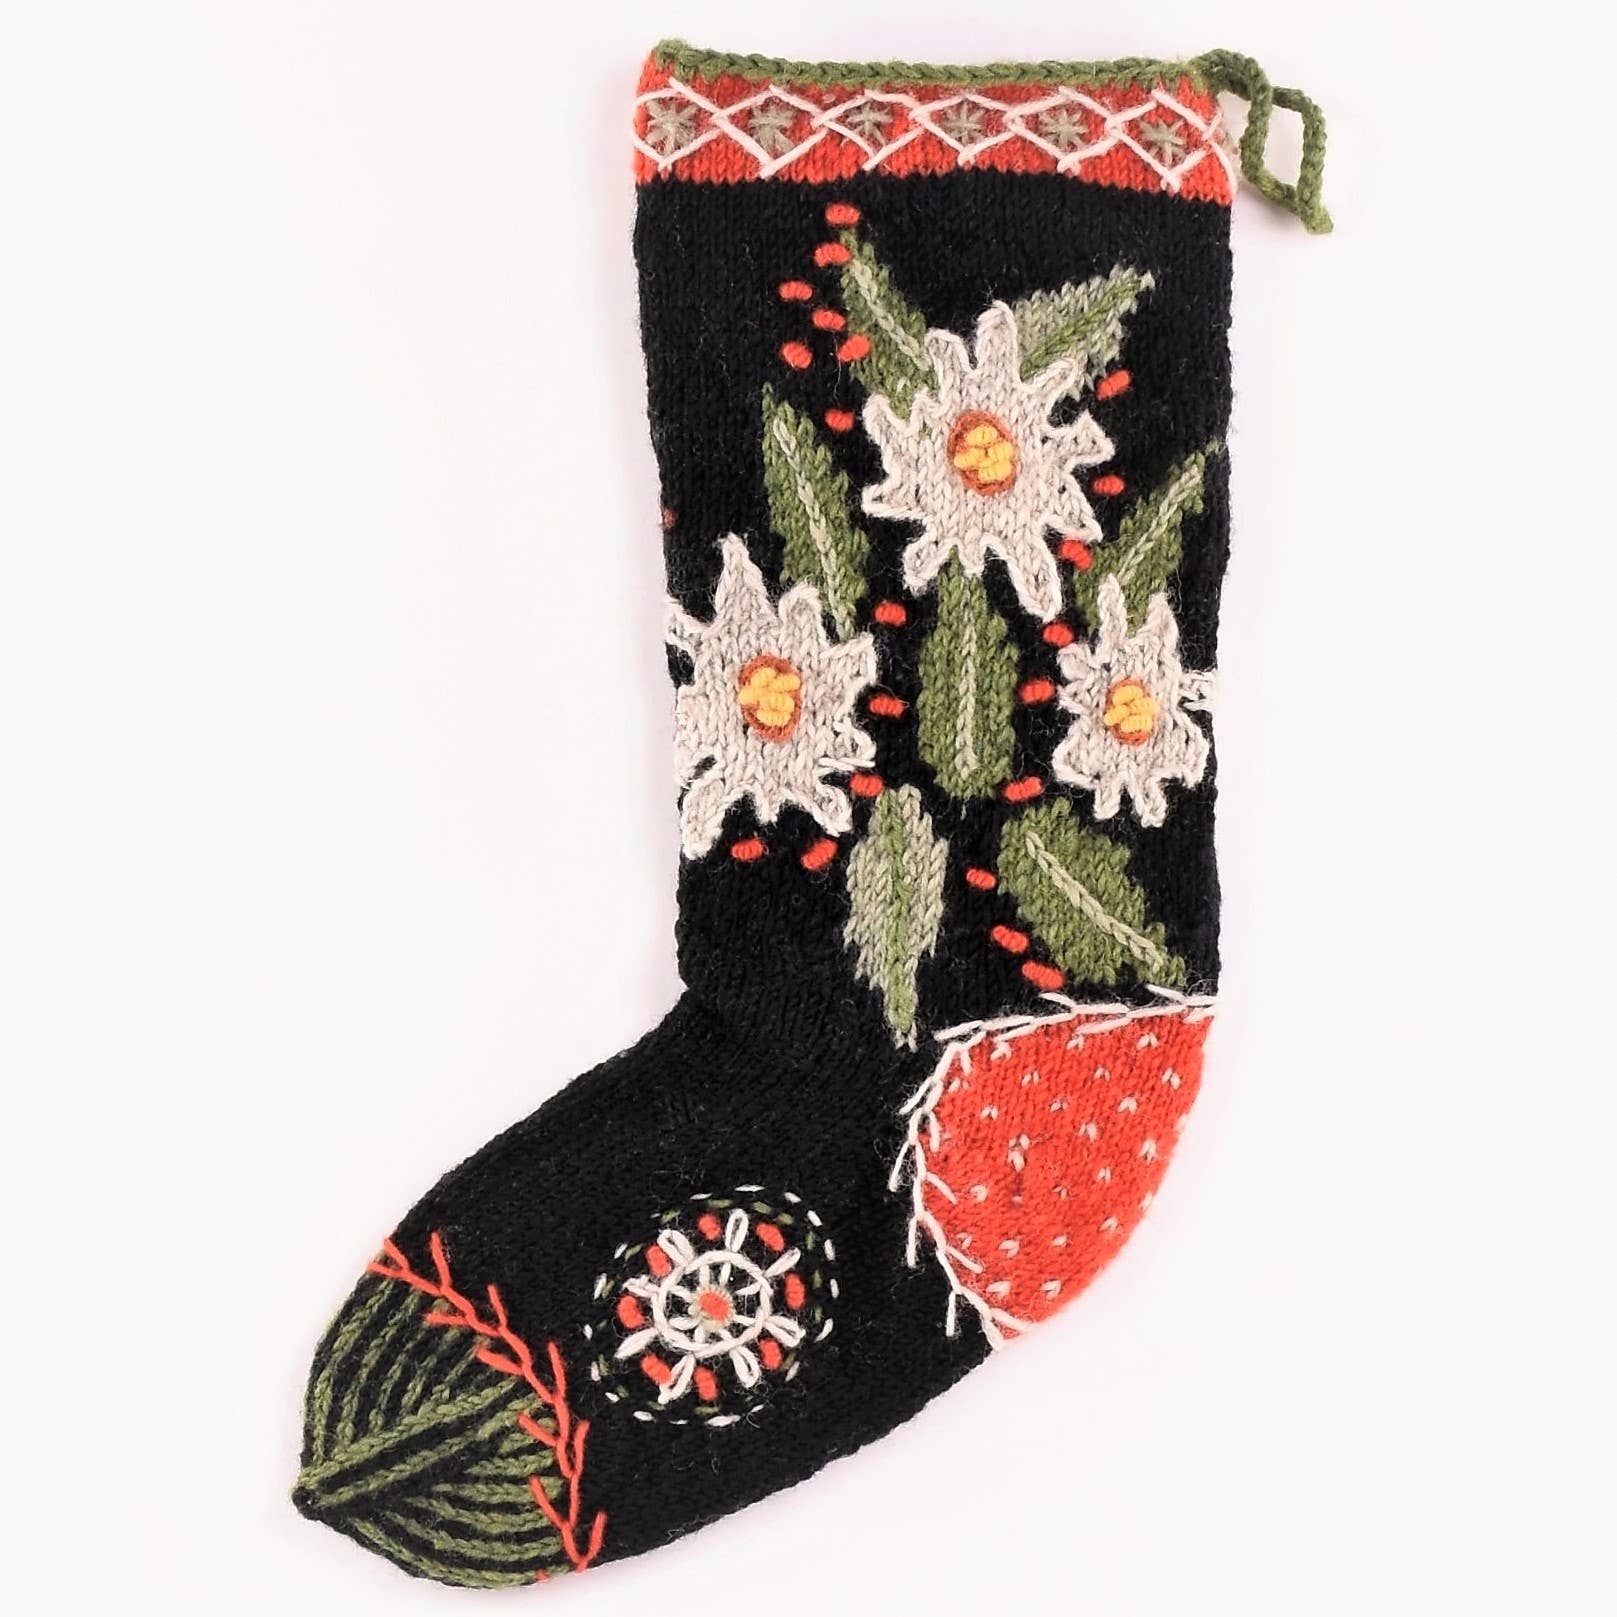 Knitted Wool Christmas Stocking - Edelweiss